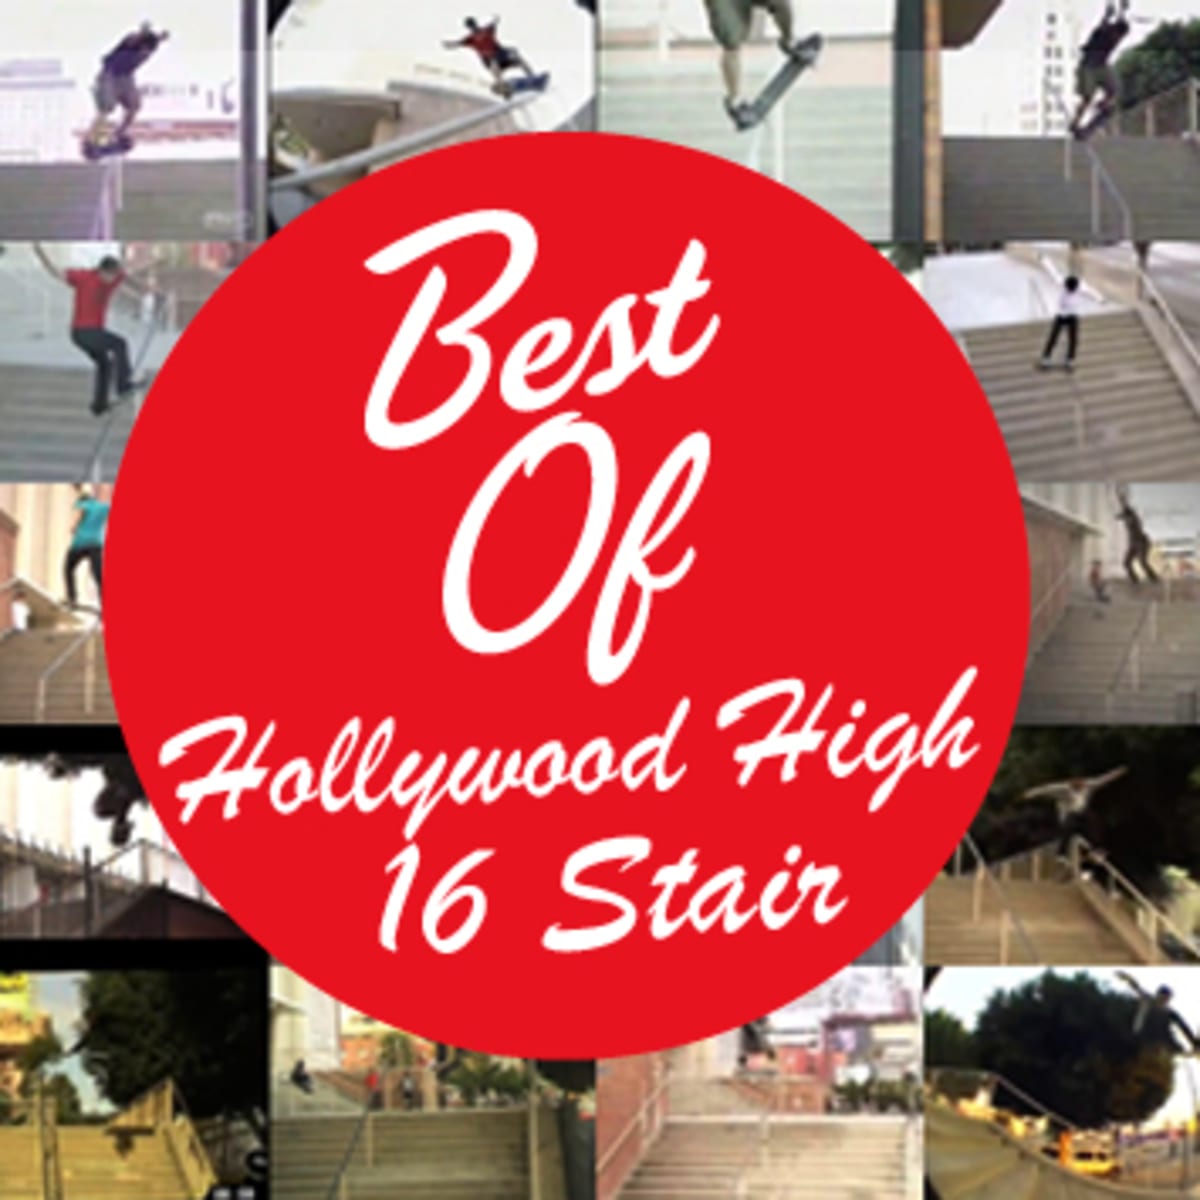 Oral history of Hollywood High 16: L.A.'s iconic skate spot - Los Angeles  Times